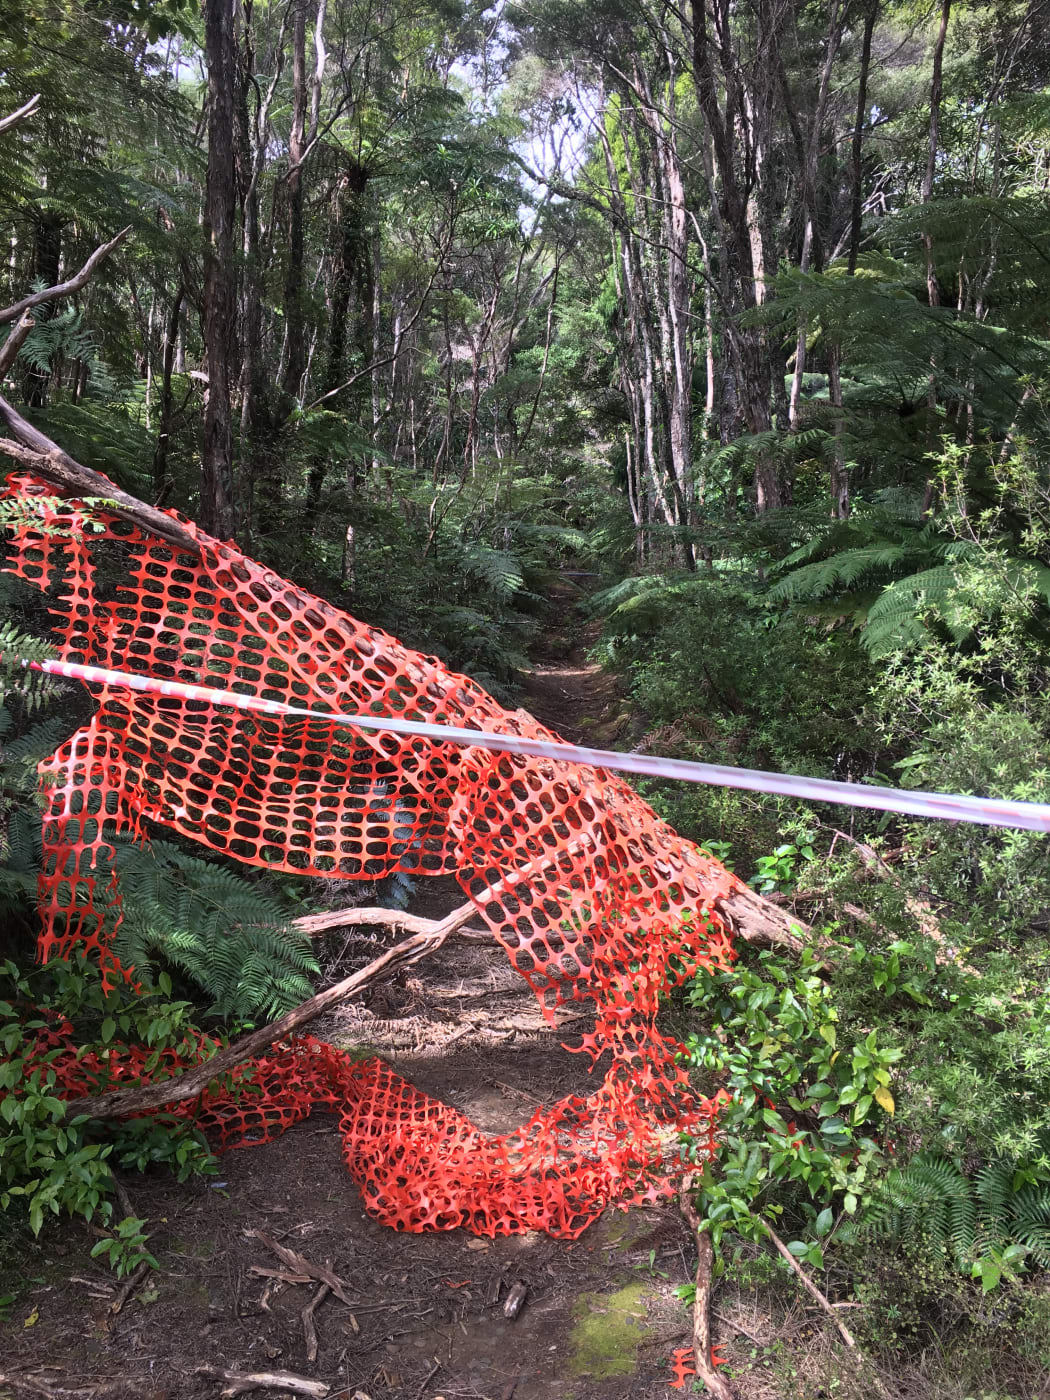 Protect our Kauri says this is an example of poor barrier to a closed track.